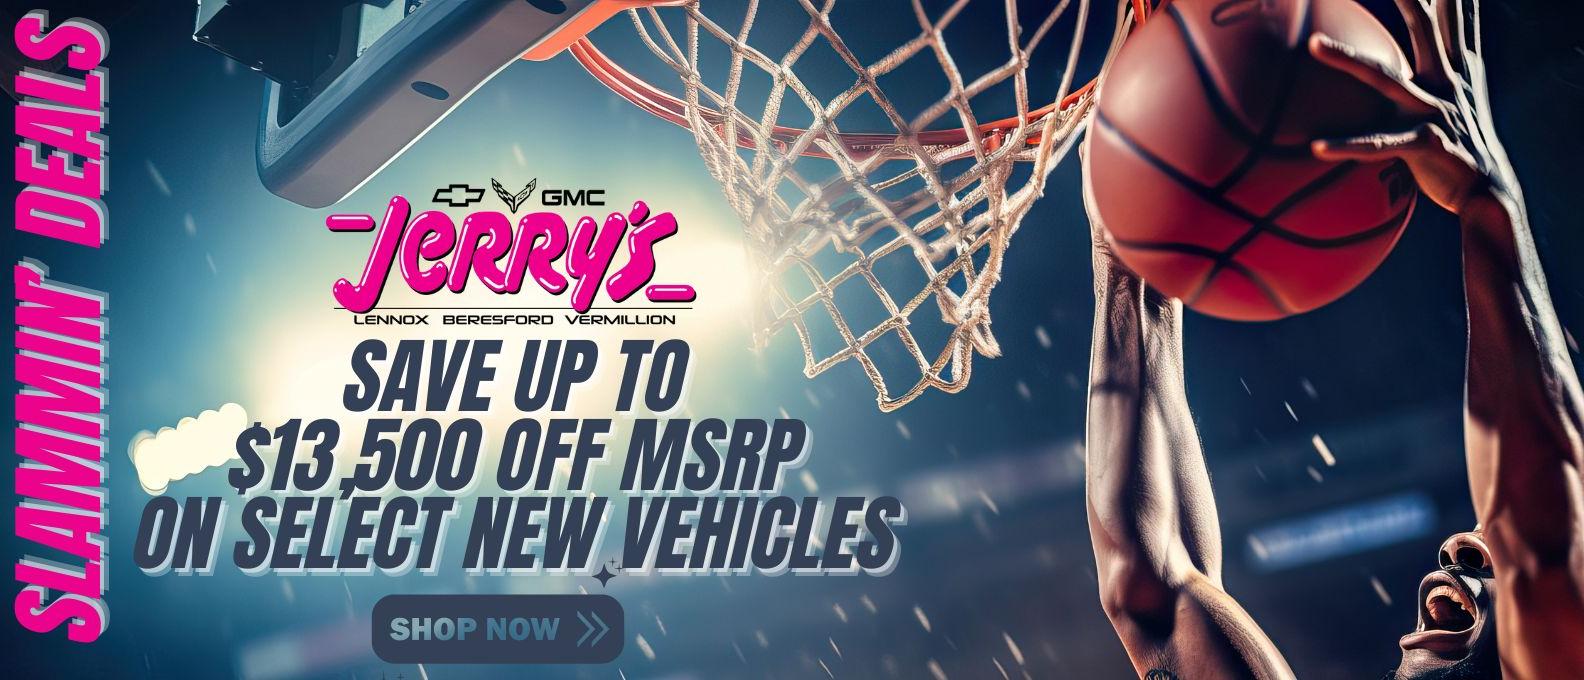 Save up to $13,500 off MSRP on select New Vehicles at Jerry's 